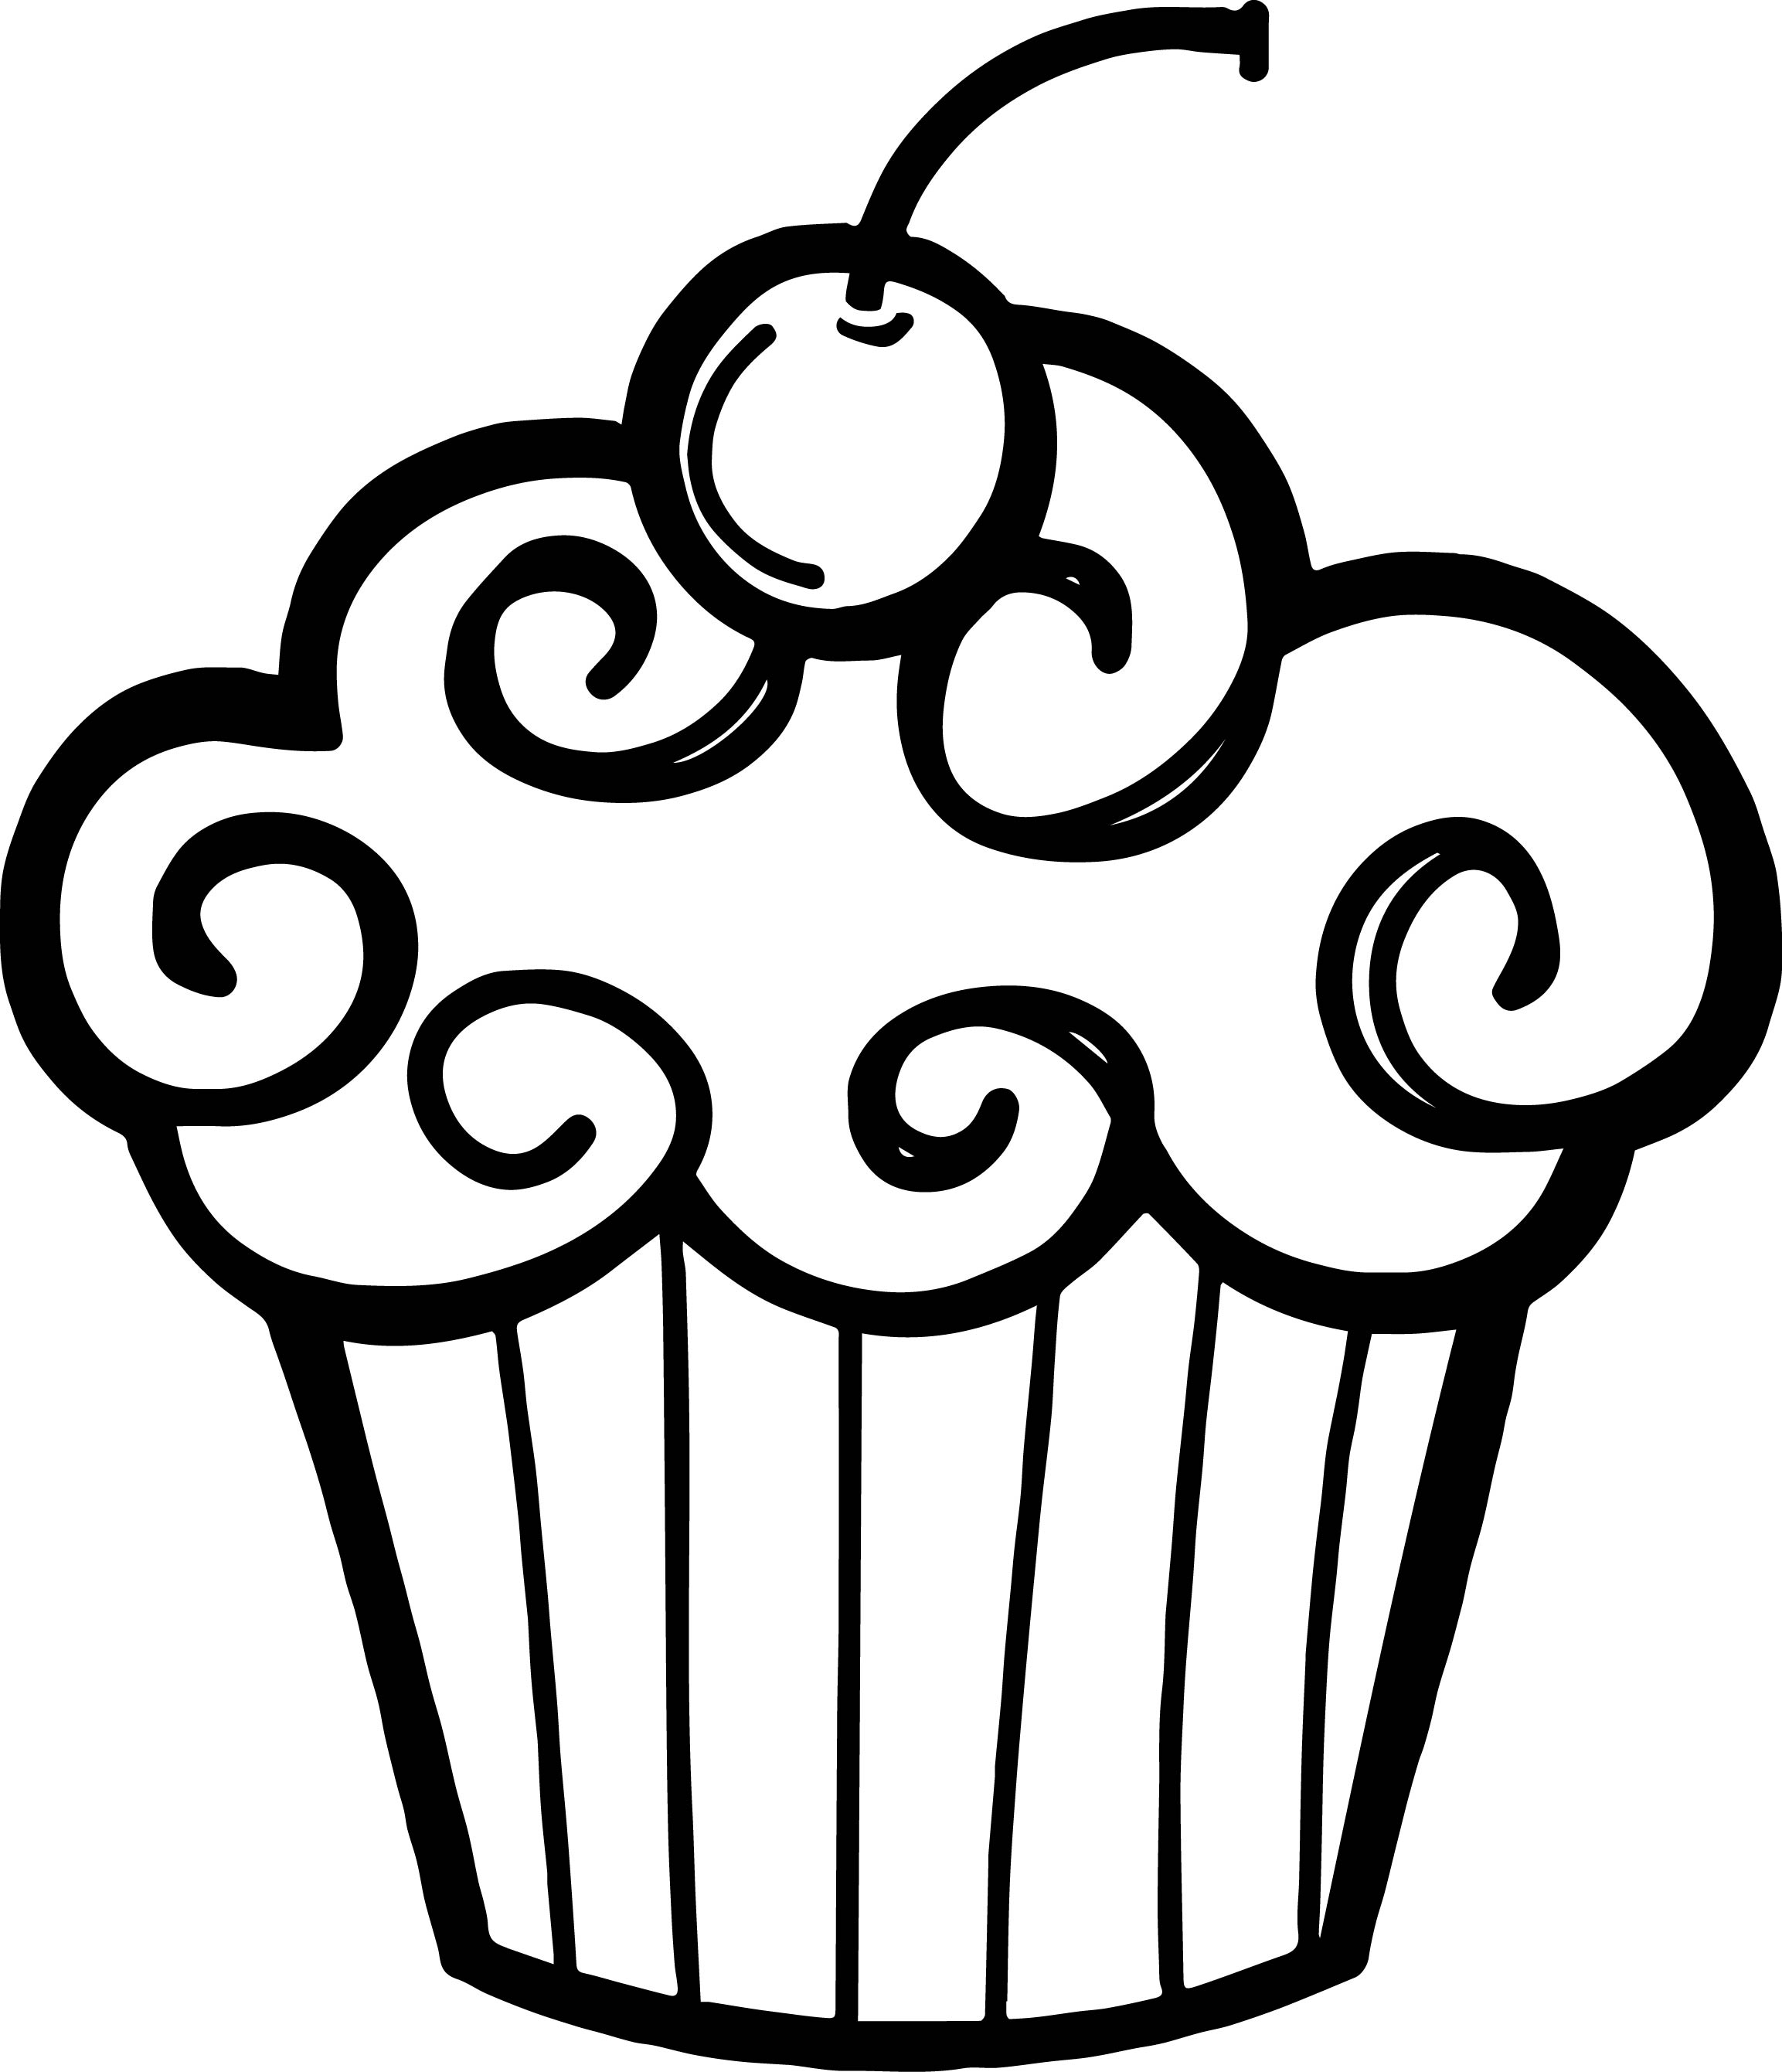 Free Clip art of Birthday Cake Clipart Black and White